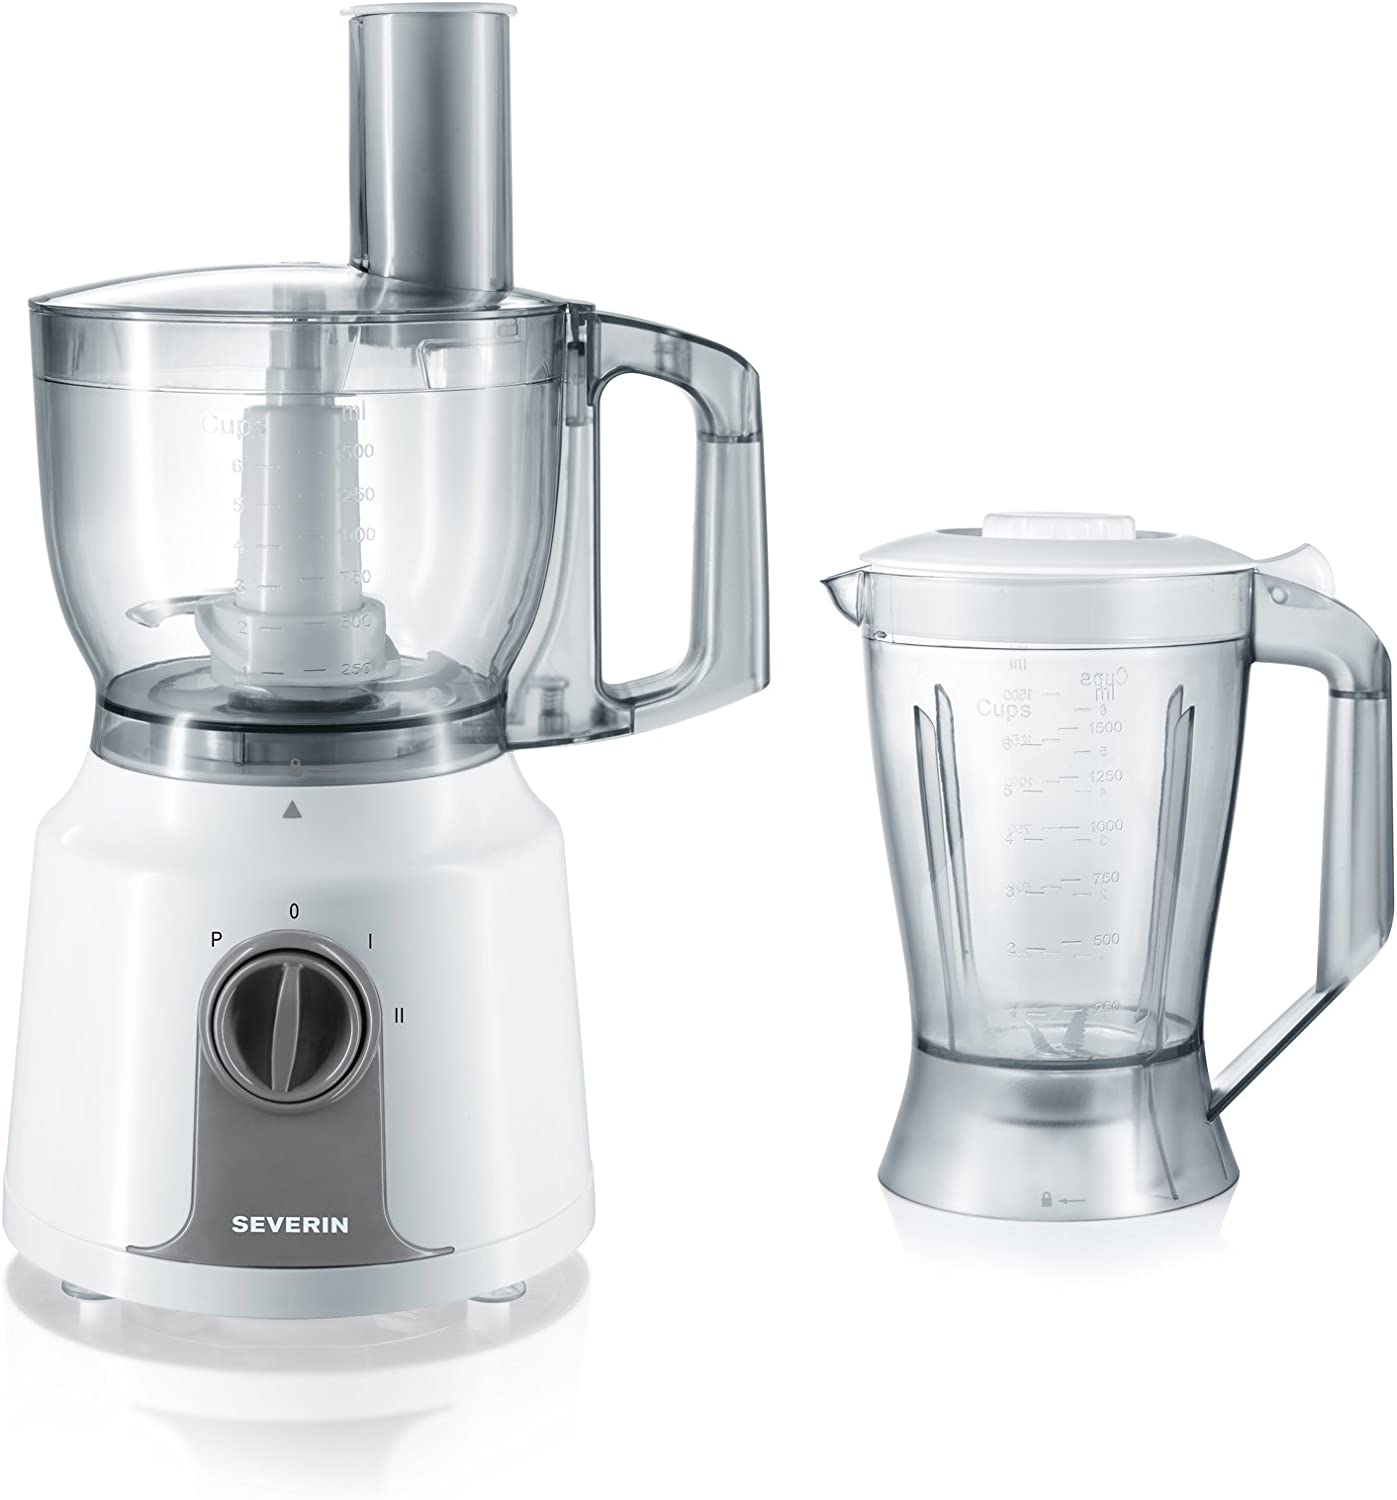 Severin KM 3909 Food Processor with Blender Attachment, White/Grey